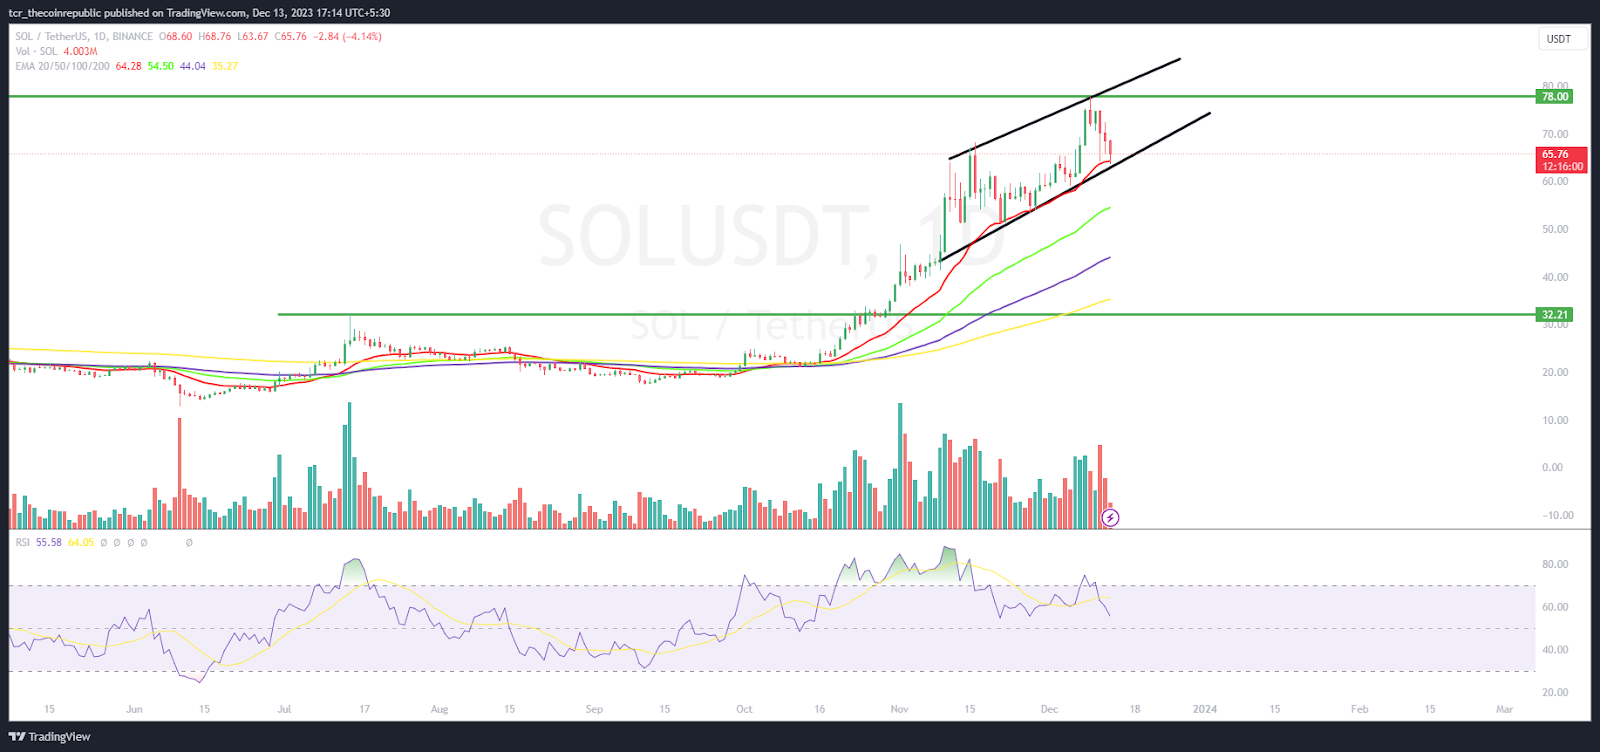 Solana Price Prediction: SOL Gains Pace, Will it Claim $100?